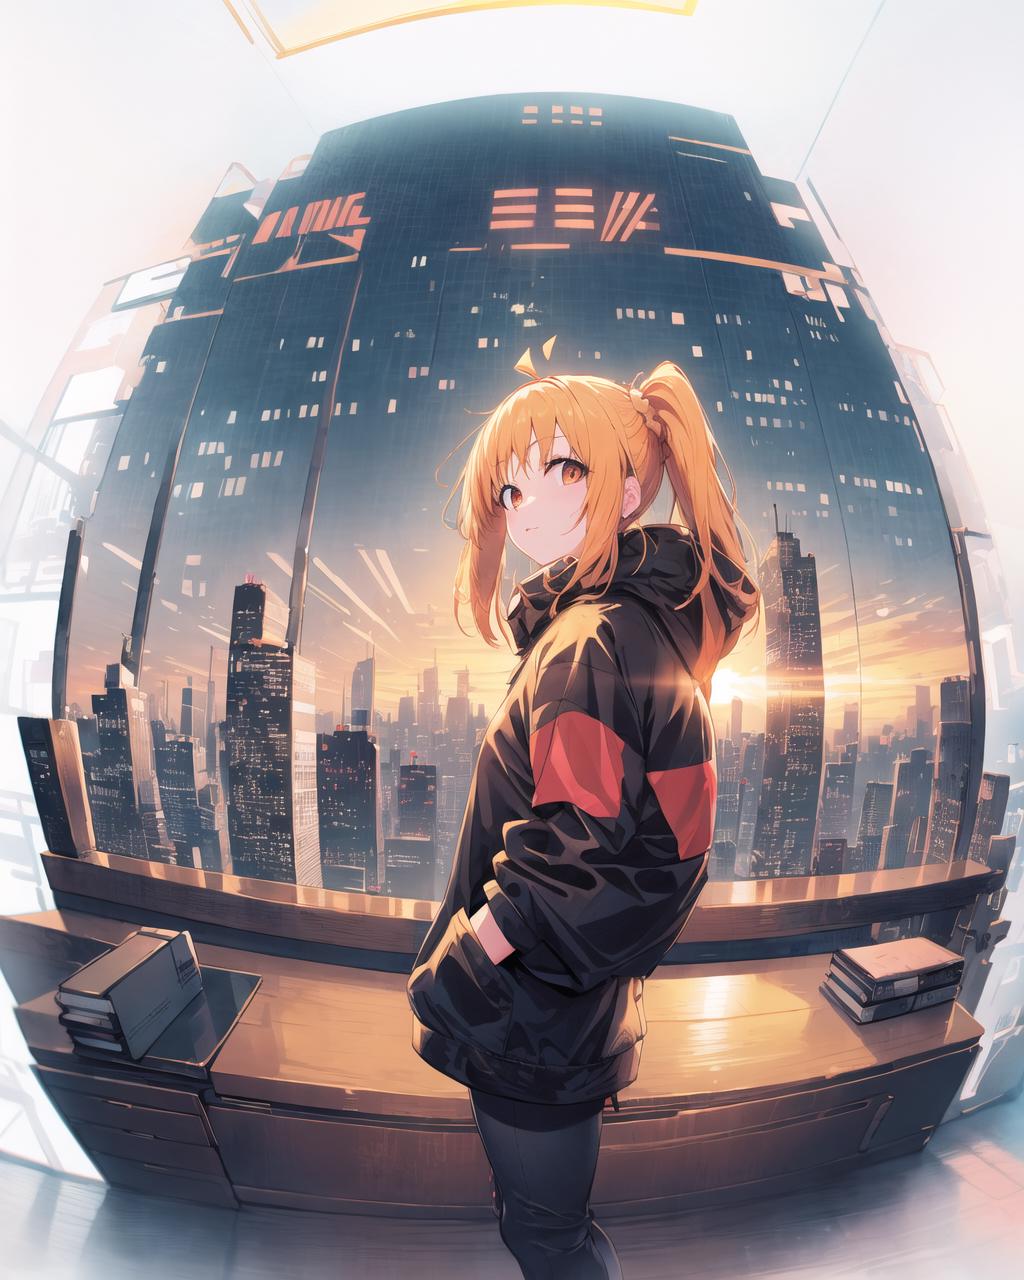 A young woman with a ponytail wearing a black jacket and standing in front of a cityscape.